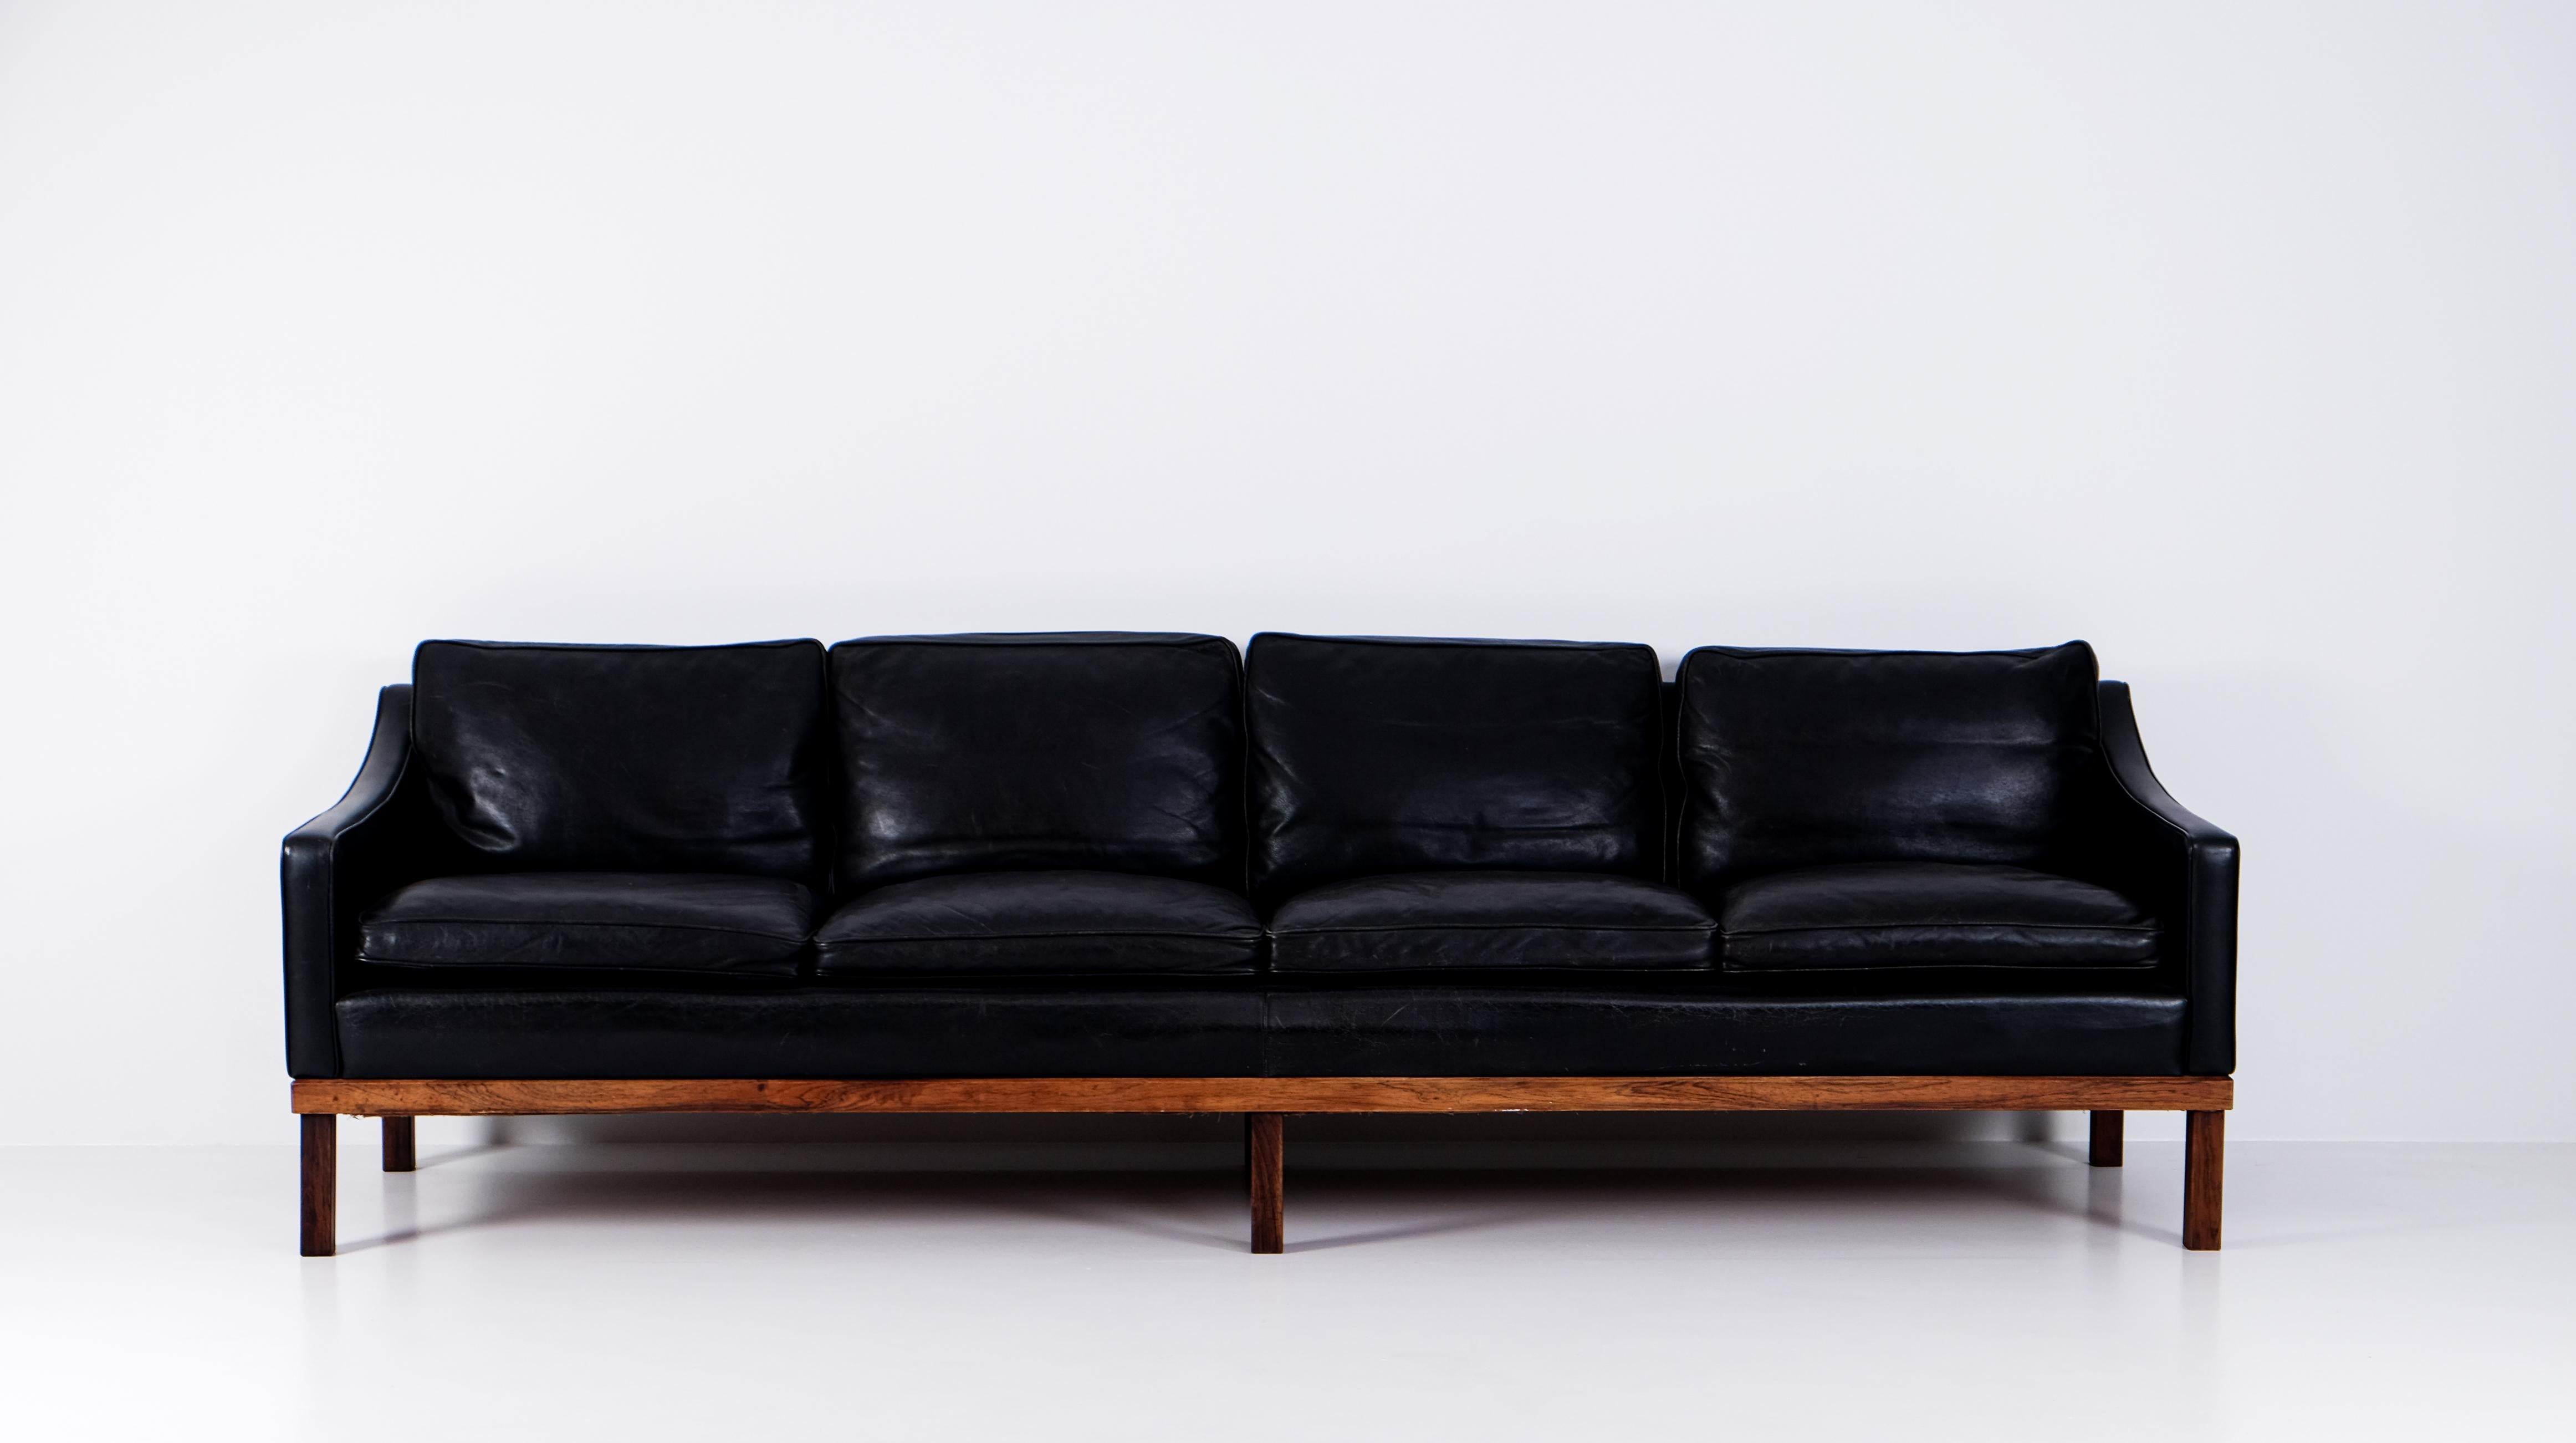 Rare Ib Kofod-Larsen Sofa, 1960s In Good Condition For Sale In Stockholm, SE